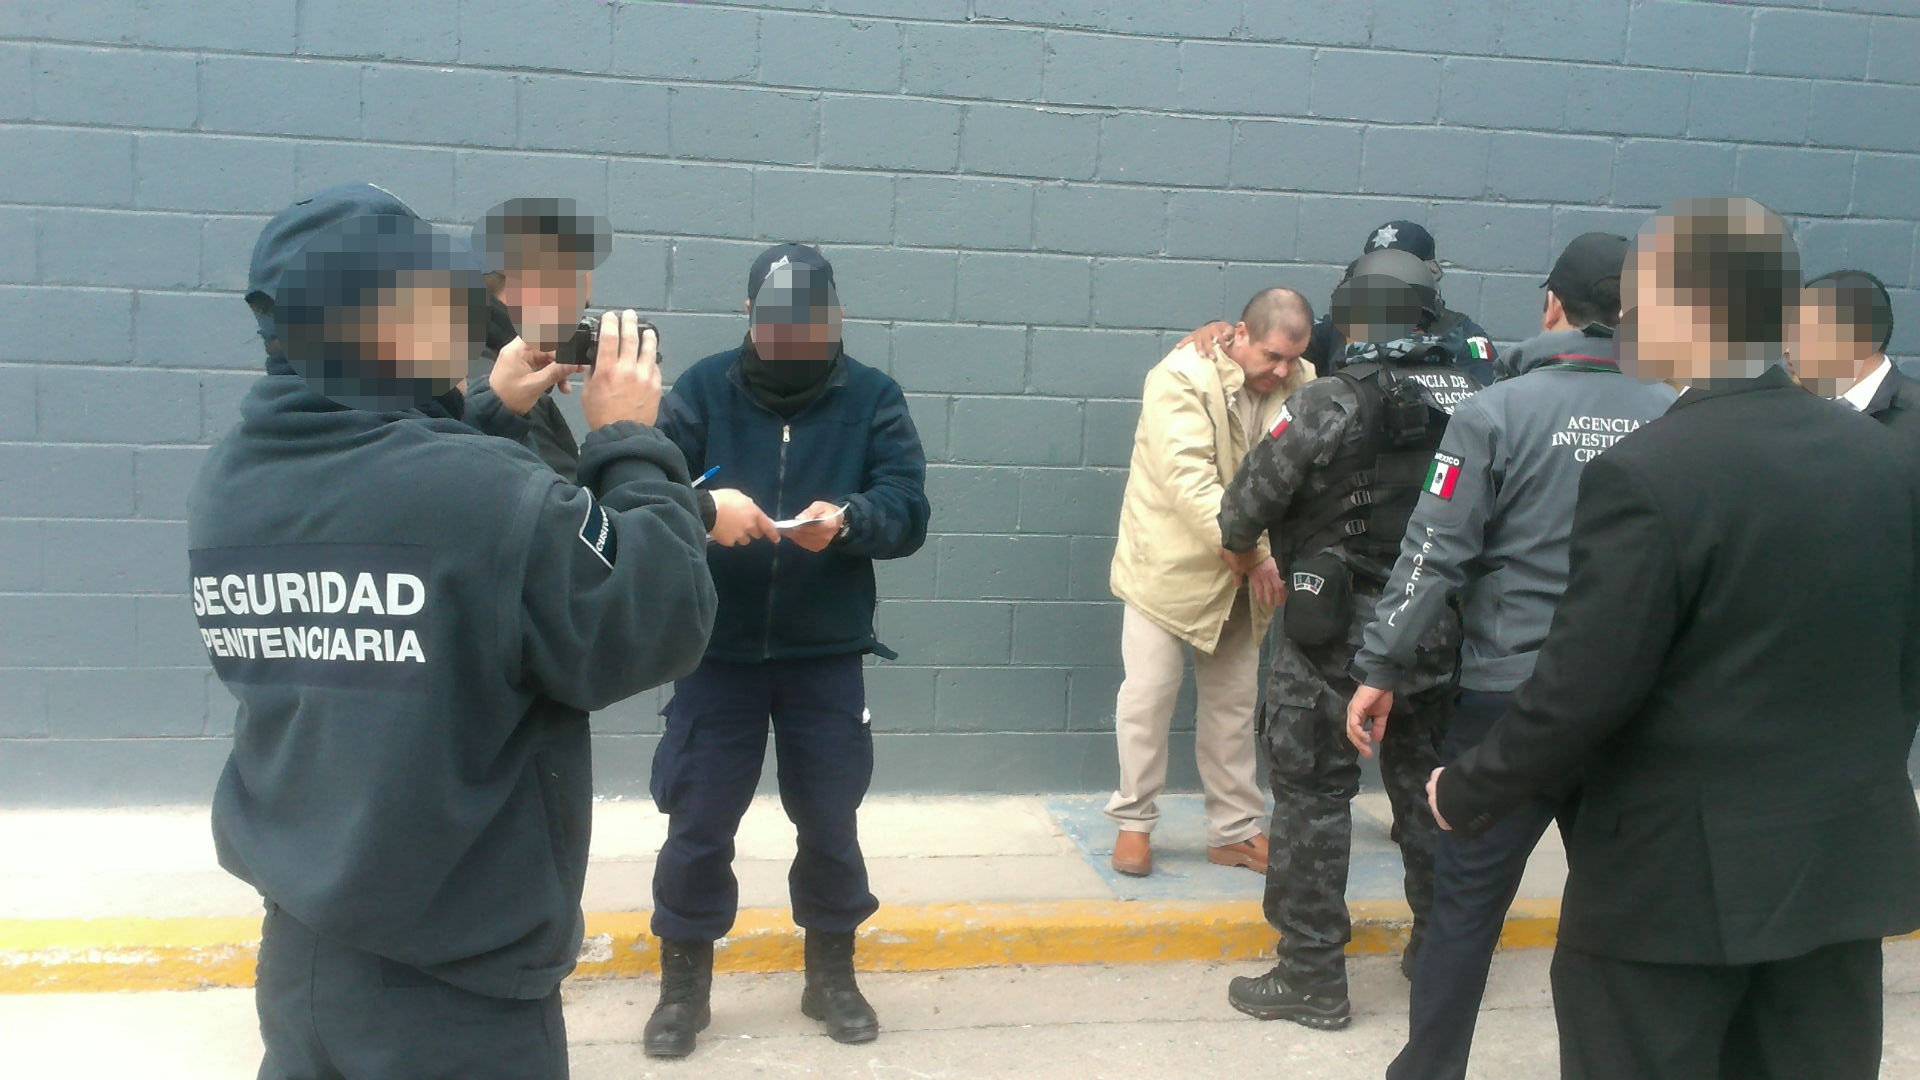 Mexico's top drug lord Joaquin "El Chapo" Guzman is escorted by police officers in Ciudad Juarez, Mexico, as he is extradited to New York